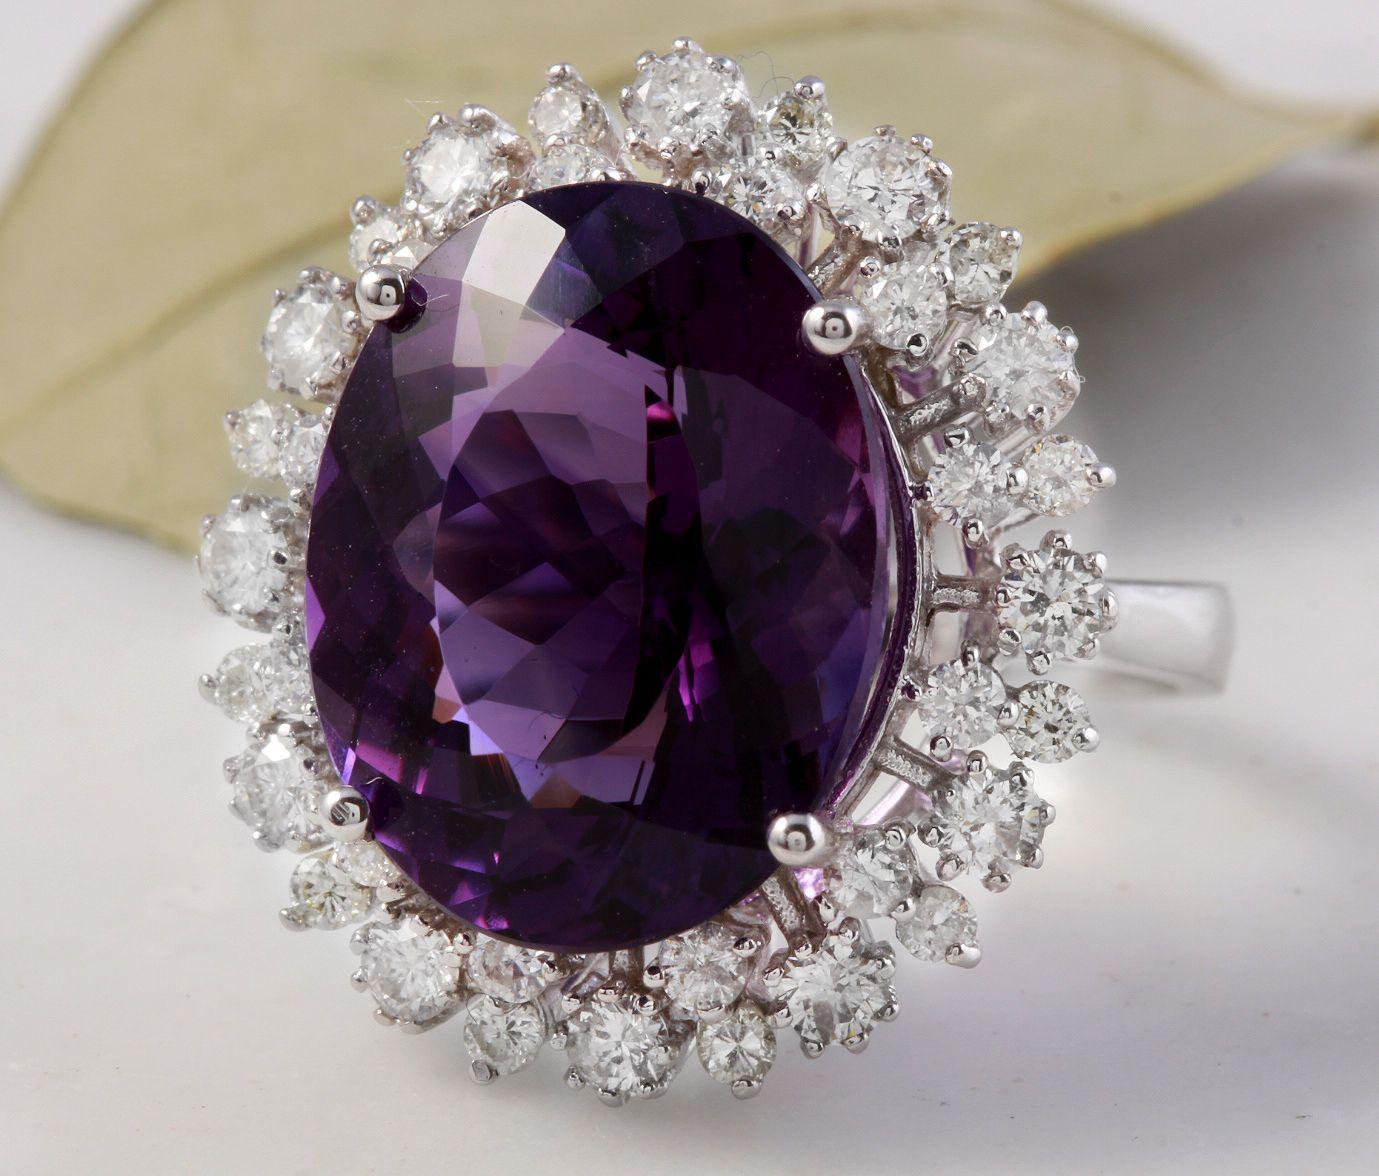 15.65 Carats Natural Amethyst and Diamond 14K Solid White Gold Ring

Total Natural Oval Shaped Amethyst Weights: 14.25 Carats (VVS)

Amethyst Measures: 18 x 14mm

Natural Round Diamonds Weight: 1.40 Carats (color F-G / Clarity VS2-SI1)

Ring size: 7